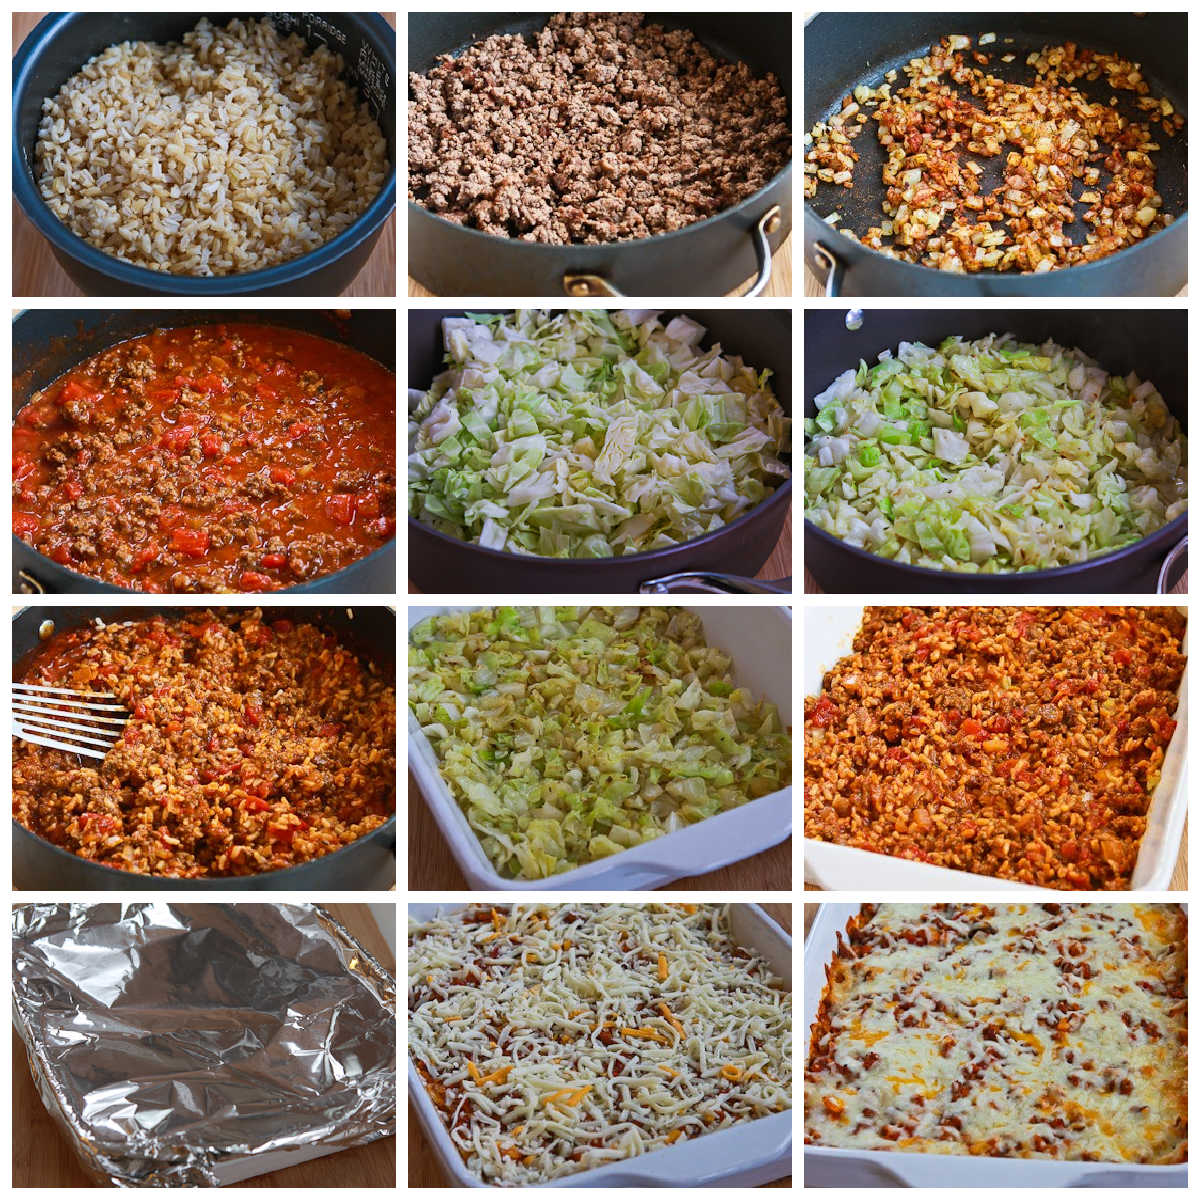 Photo collage for Deconstructed Stuffed Cabbage Casserole showing steps for the recipe.